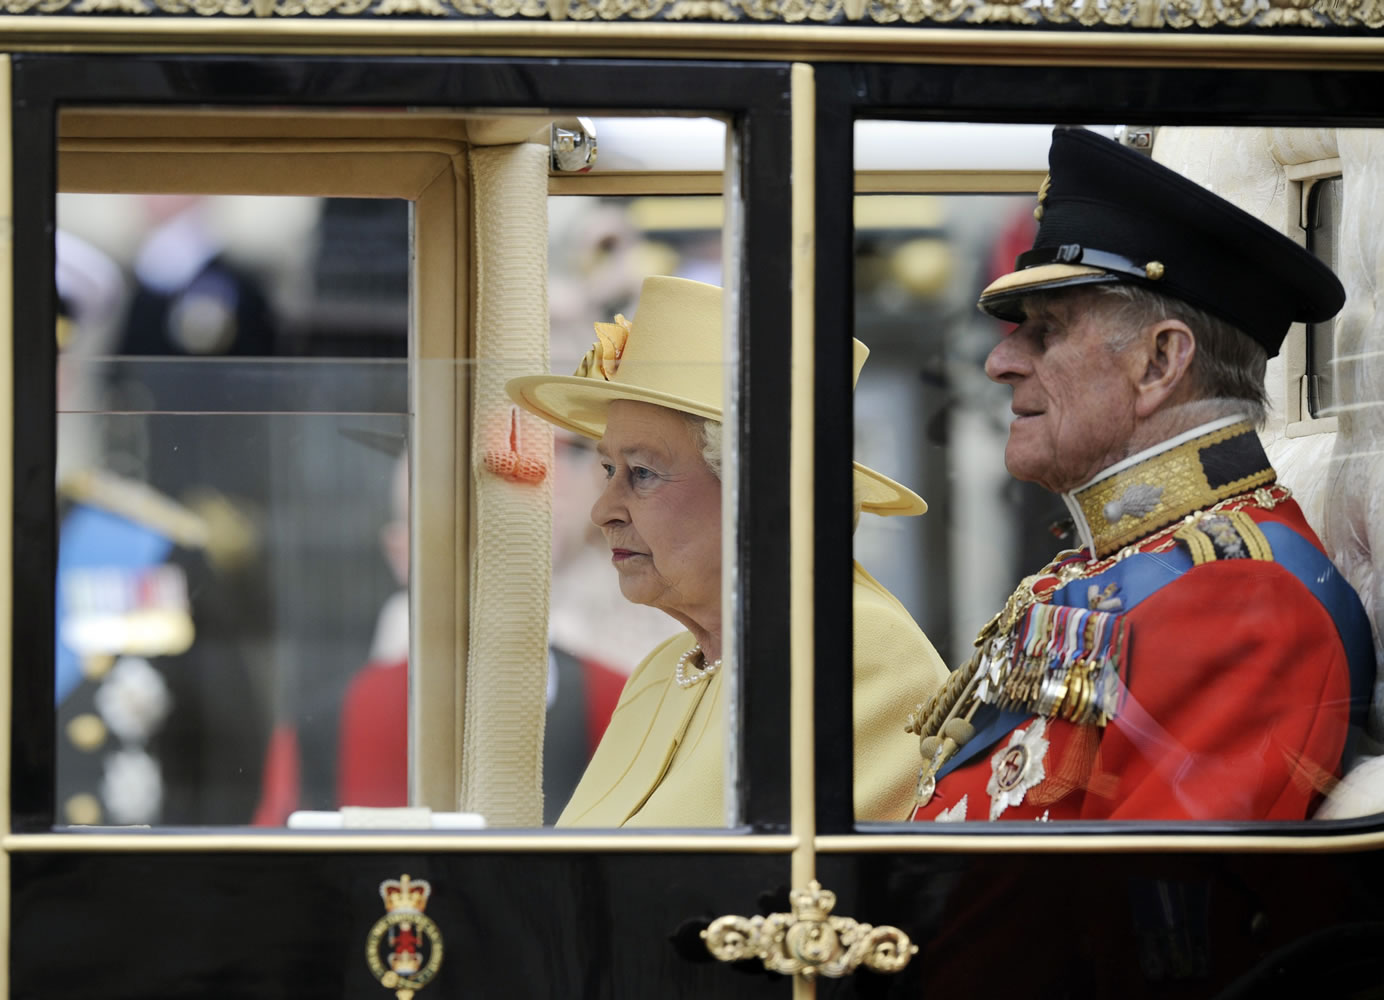 Britain's Queen Elizabeth II and Britain's Prince Philip sit in their carriage outside Westminster Abbey after the Royal Wedding for Britain's Prince William and his wife Kate, Duchess of Cambridge in London Friday, April, 29, 2011.